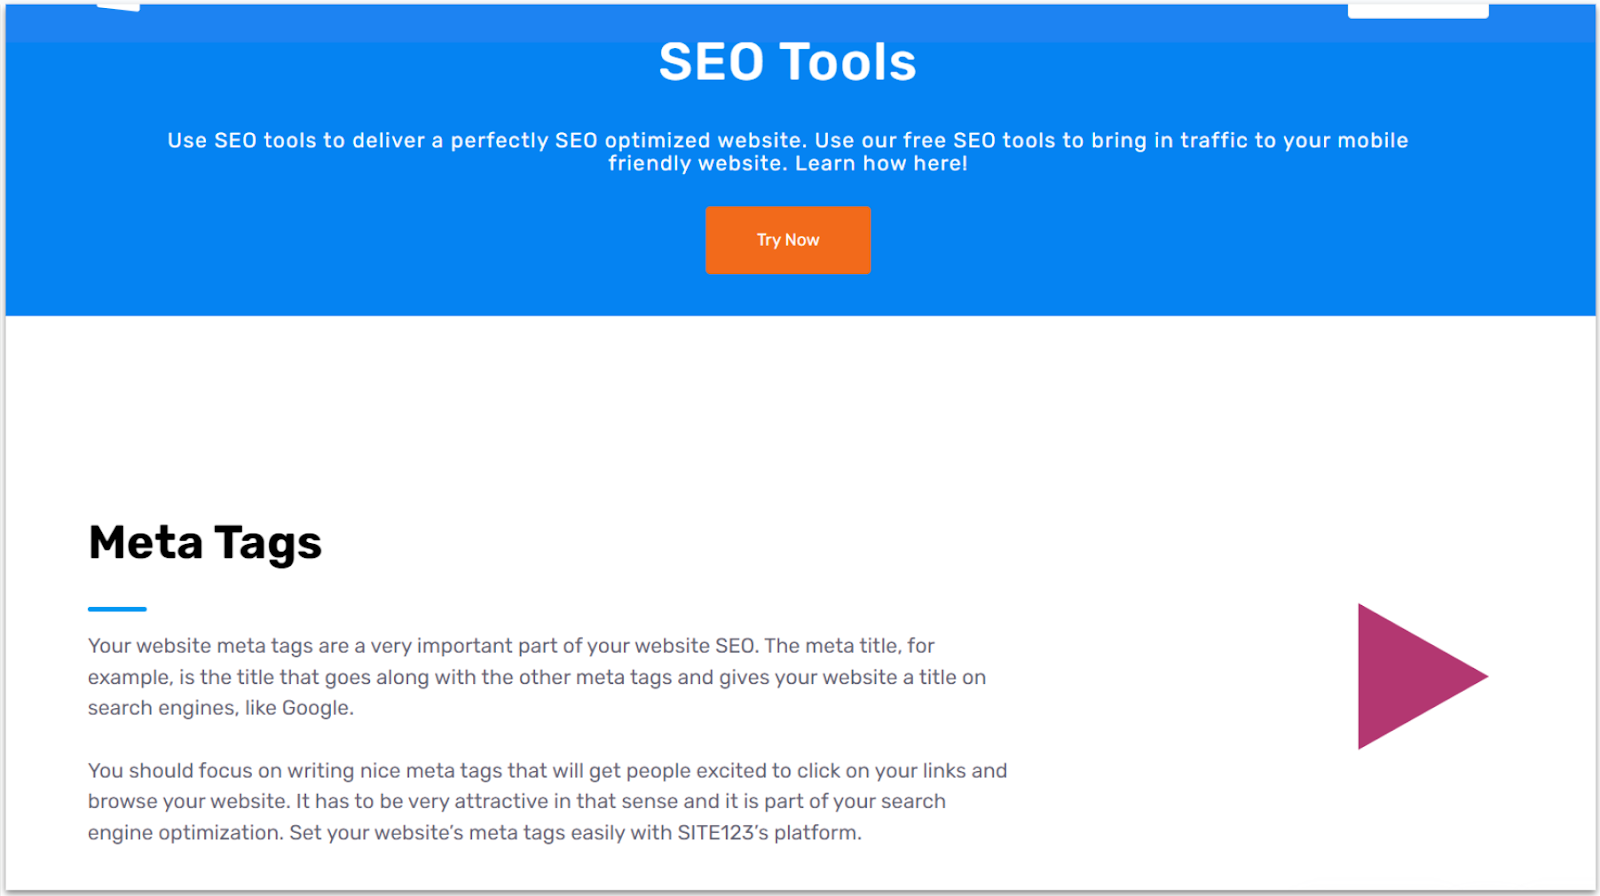 SITE123 SEO tools and Templates